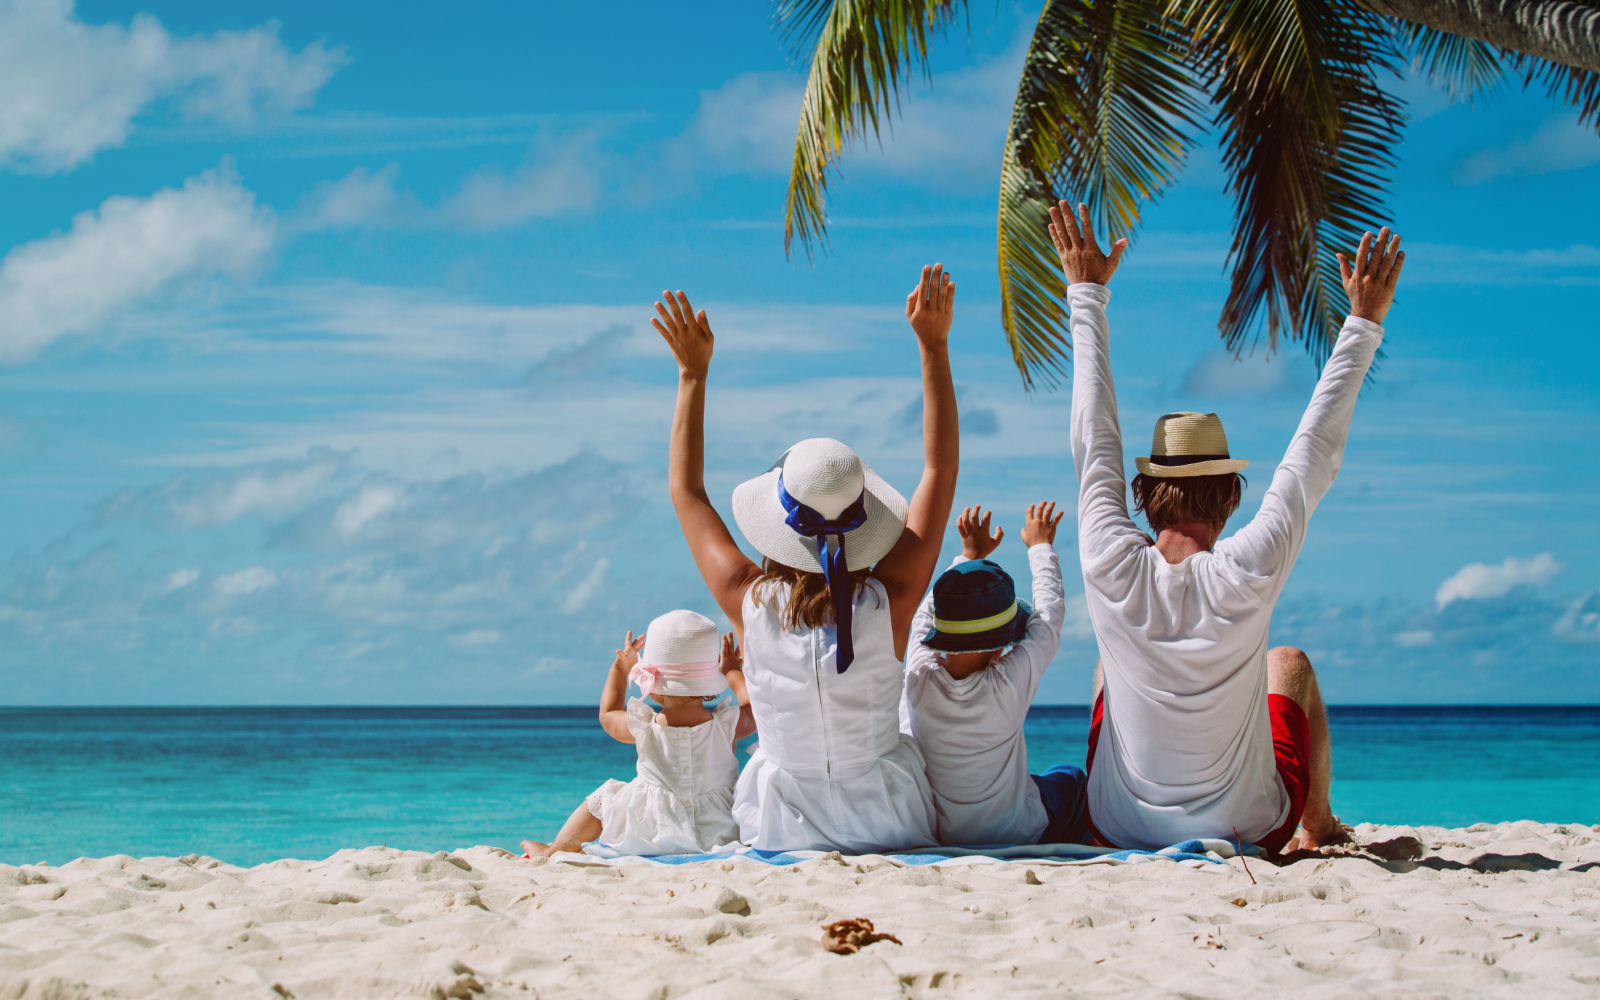 The 10 Very Best Family Vacation Spots in 2023